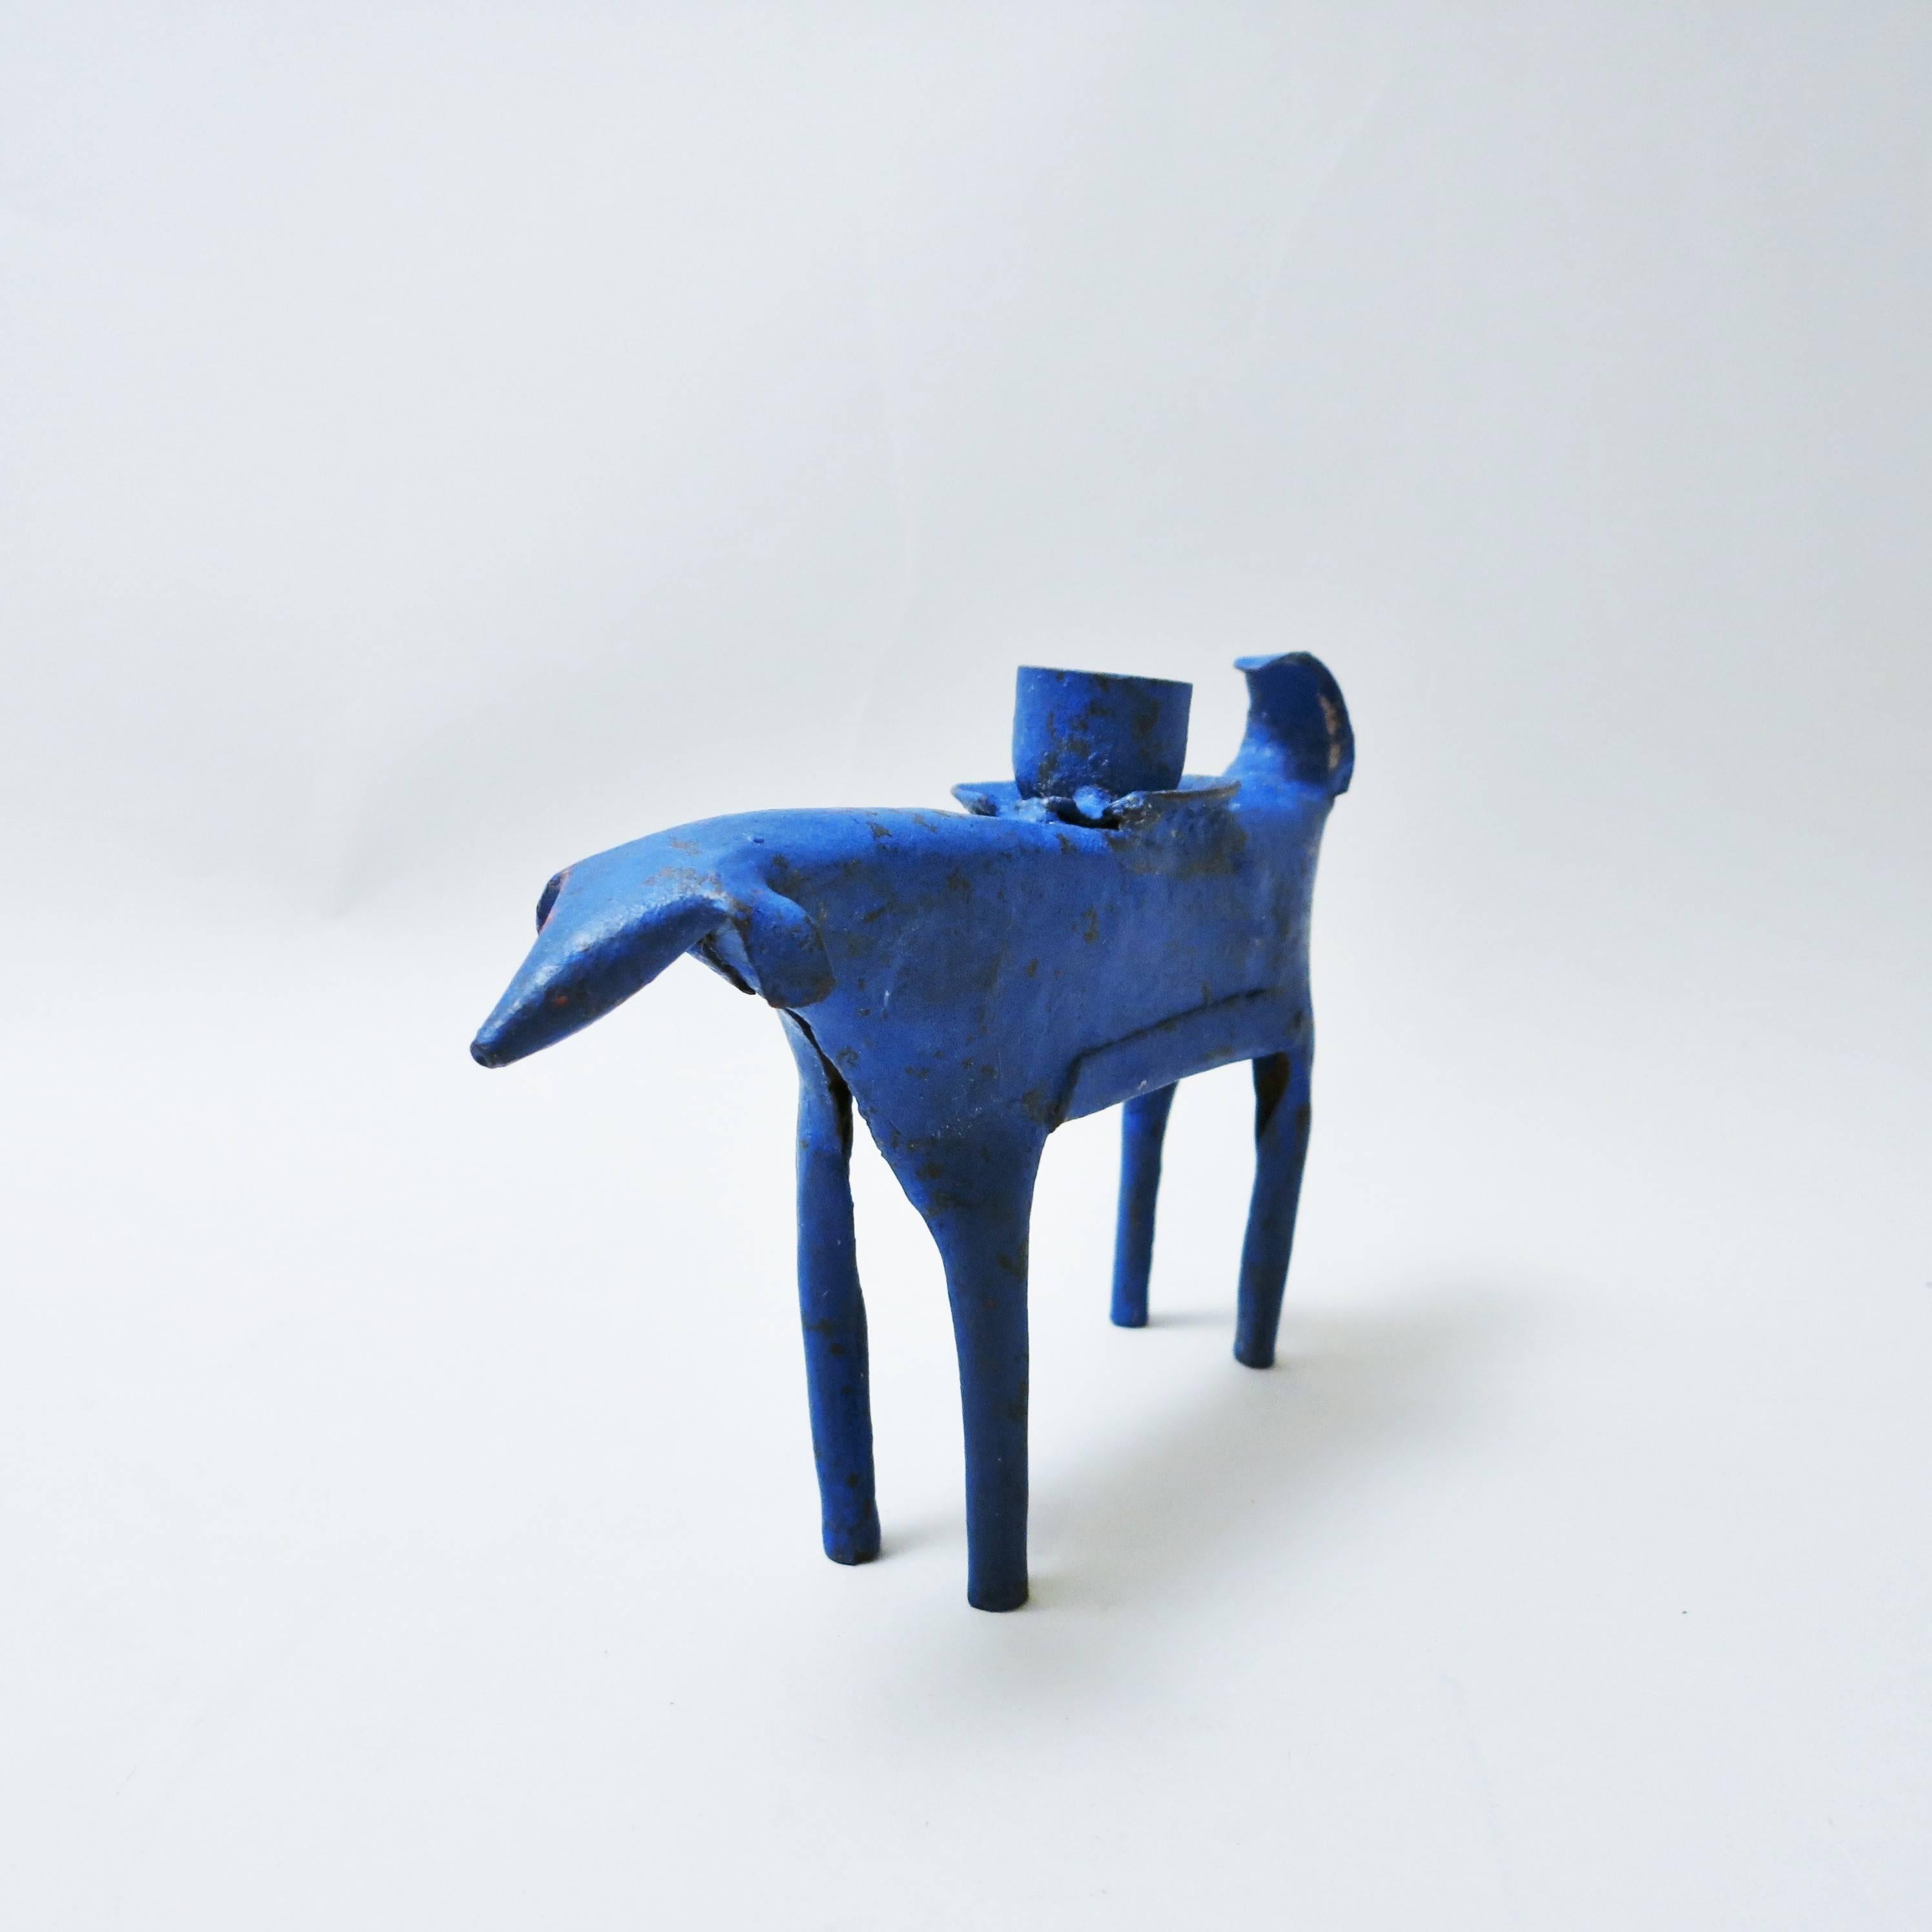 Italian Brutalist Candleholder Dog in the Style of Gio Ponti